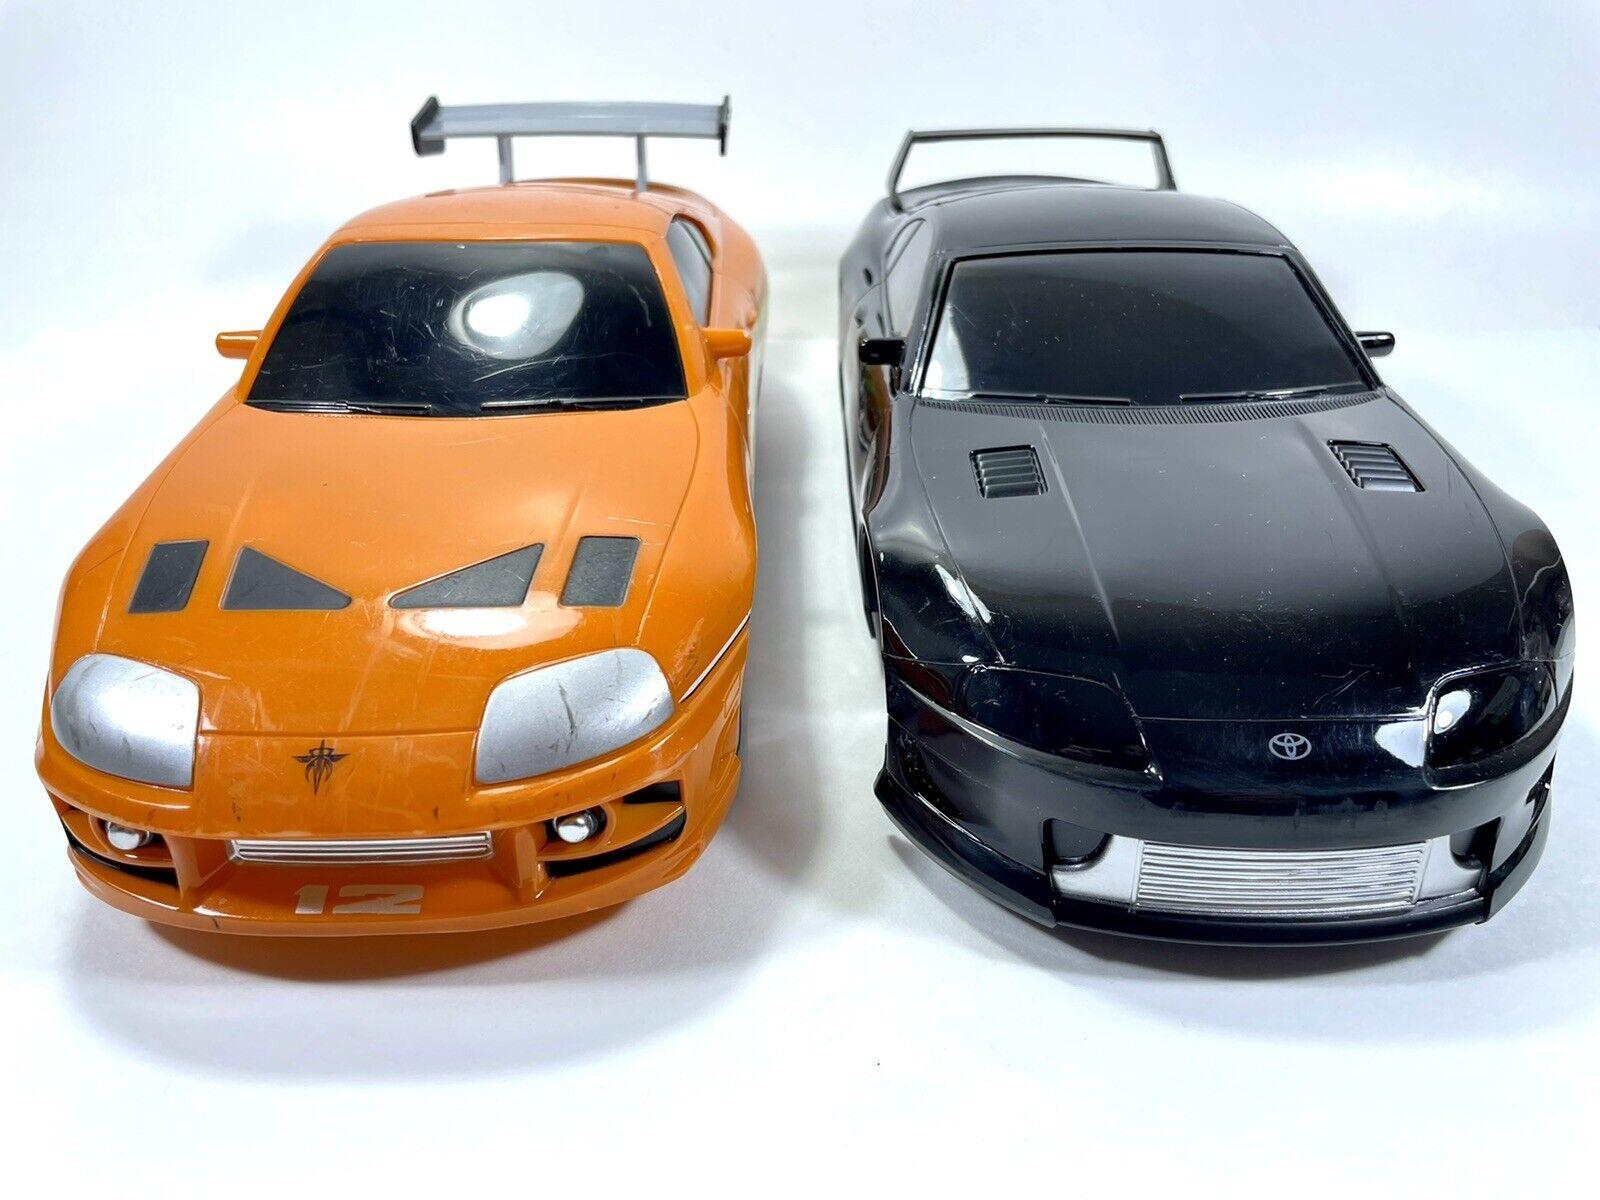 Fast Furious Remote Control Car: Looking for a Fast and Furious Remote Control Car? Look No Further!